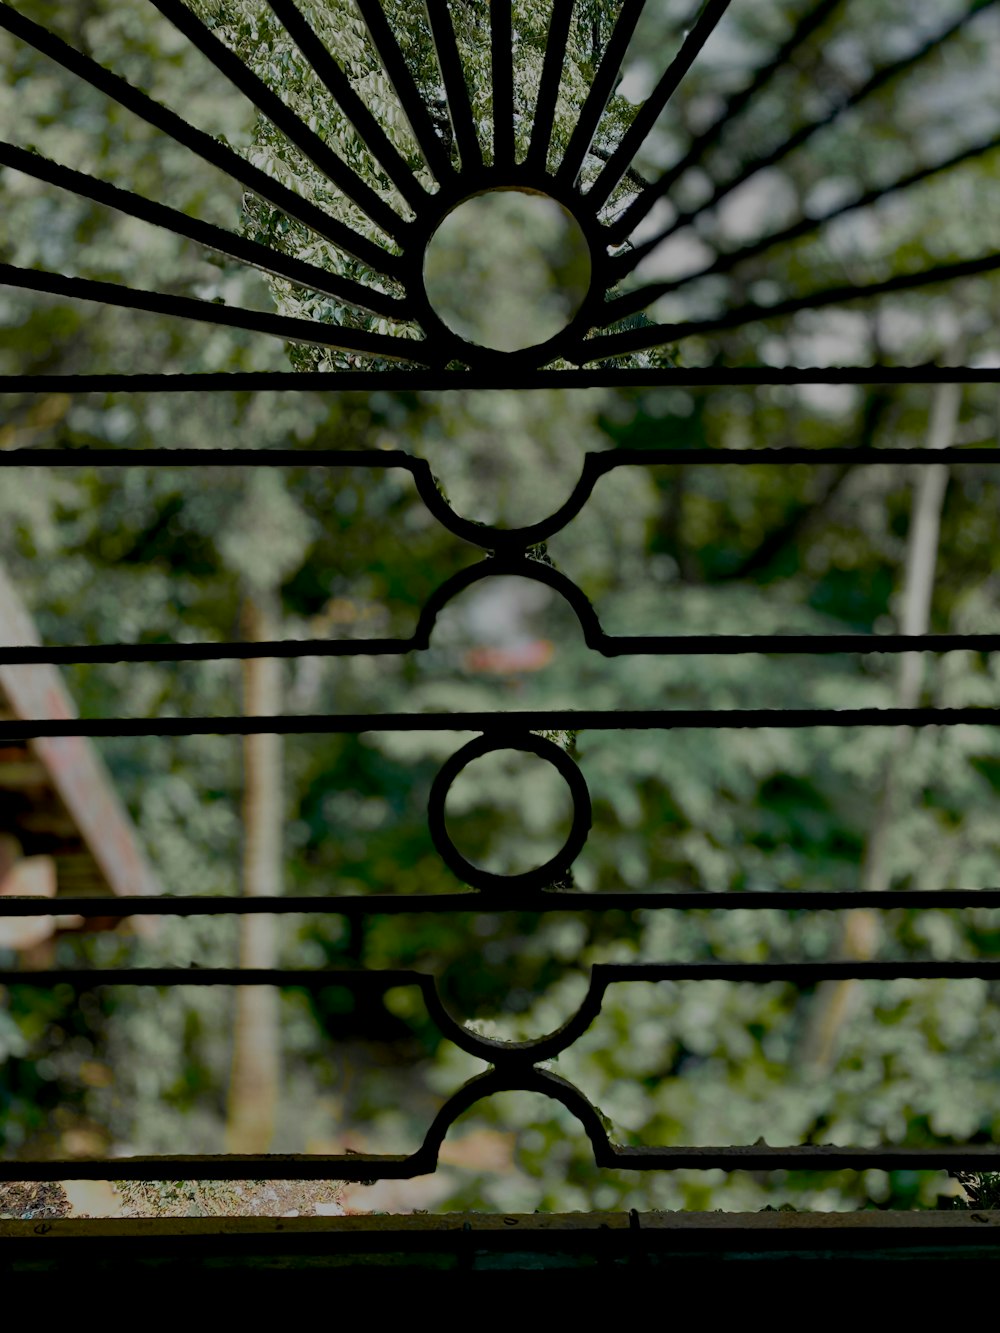 a close up of a metal gate with trees in the background